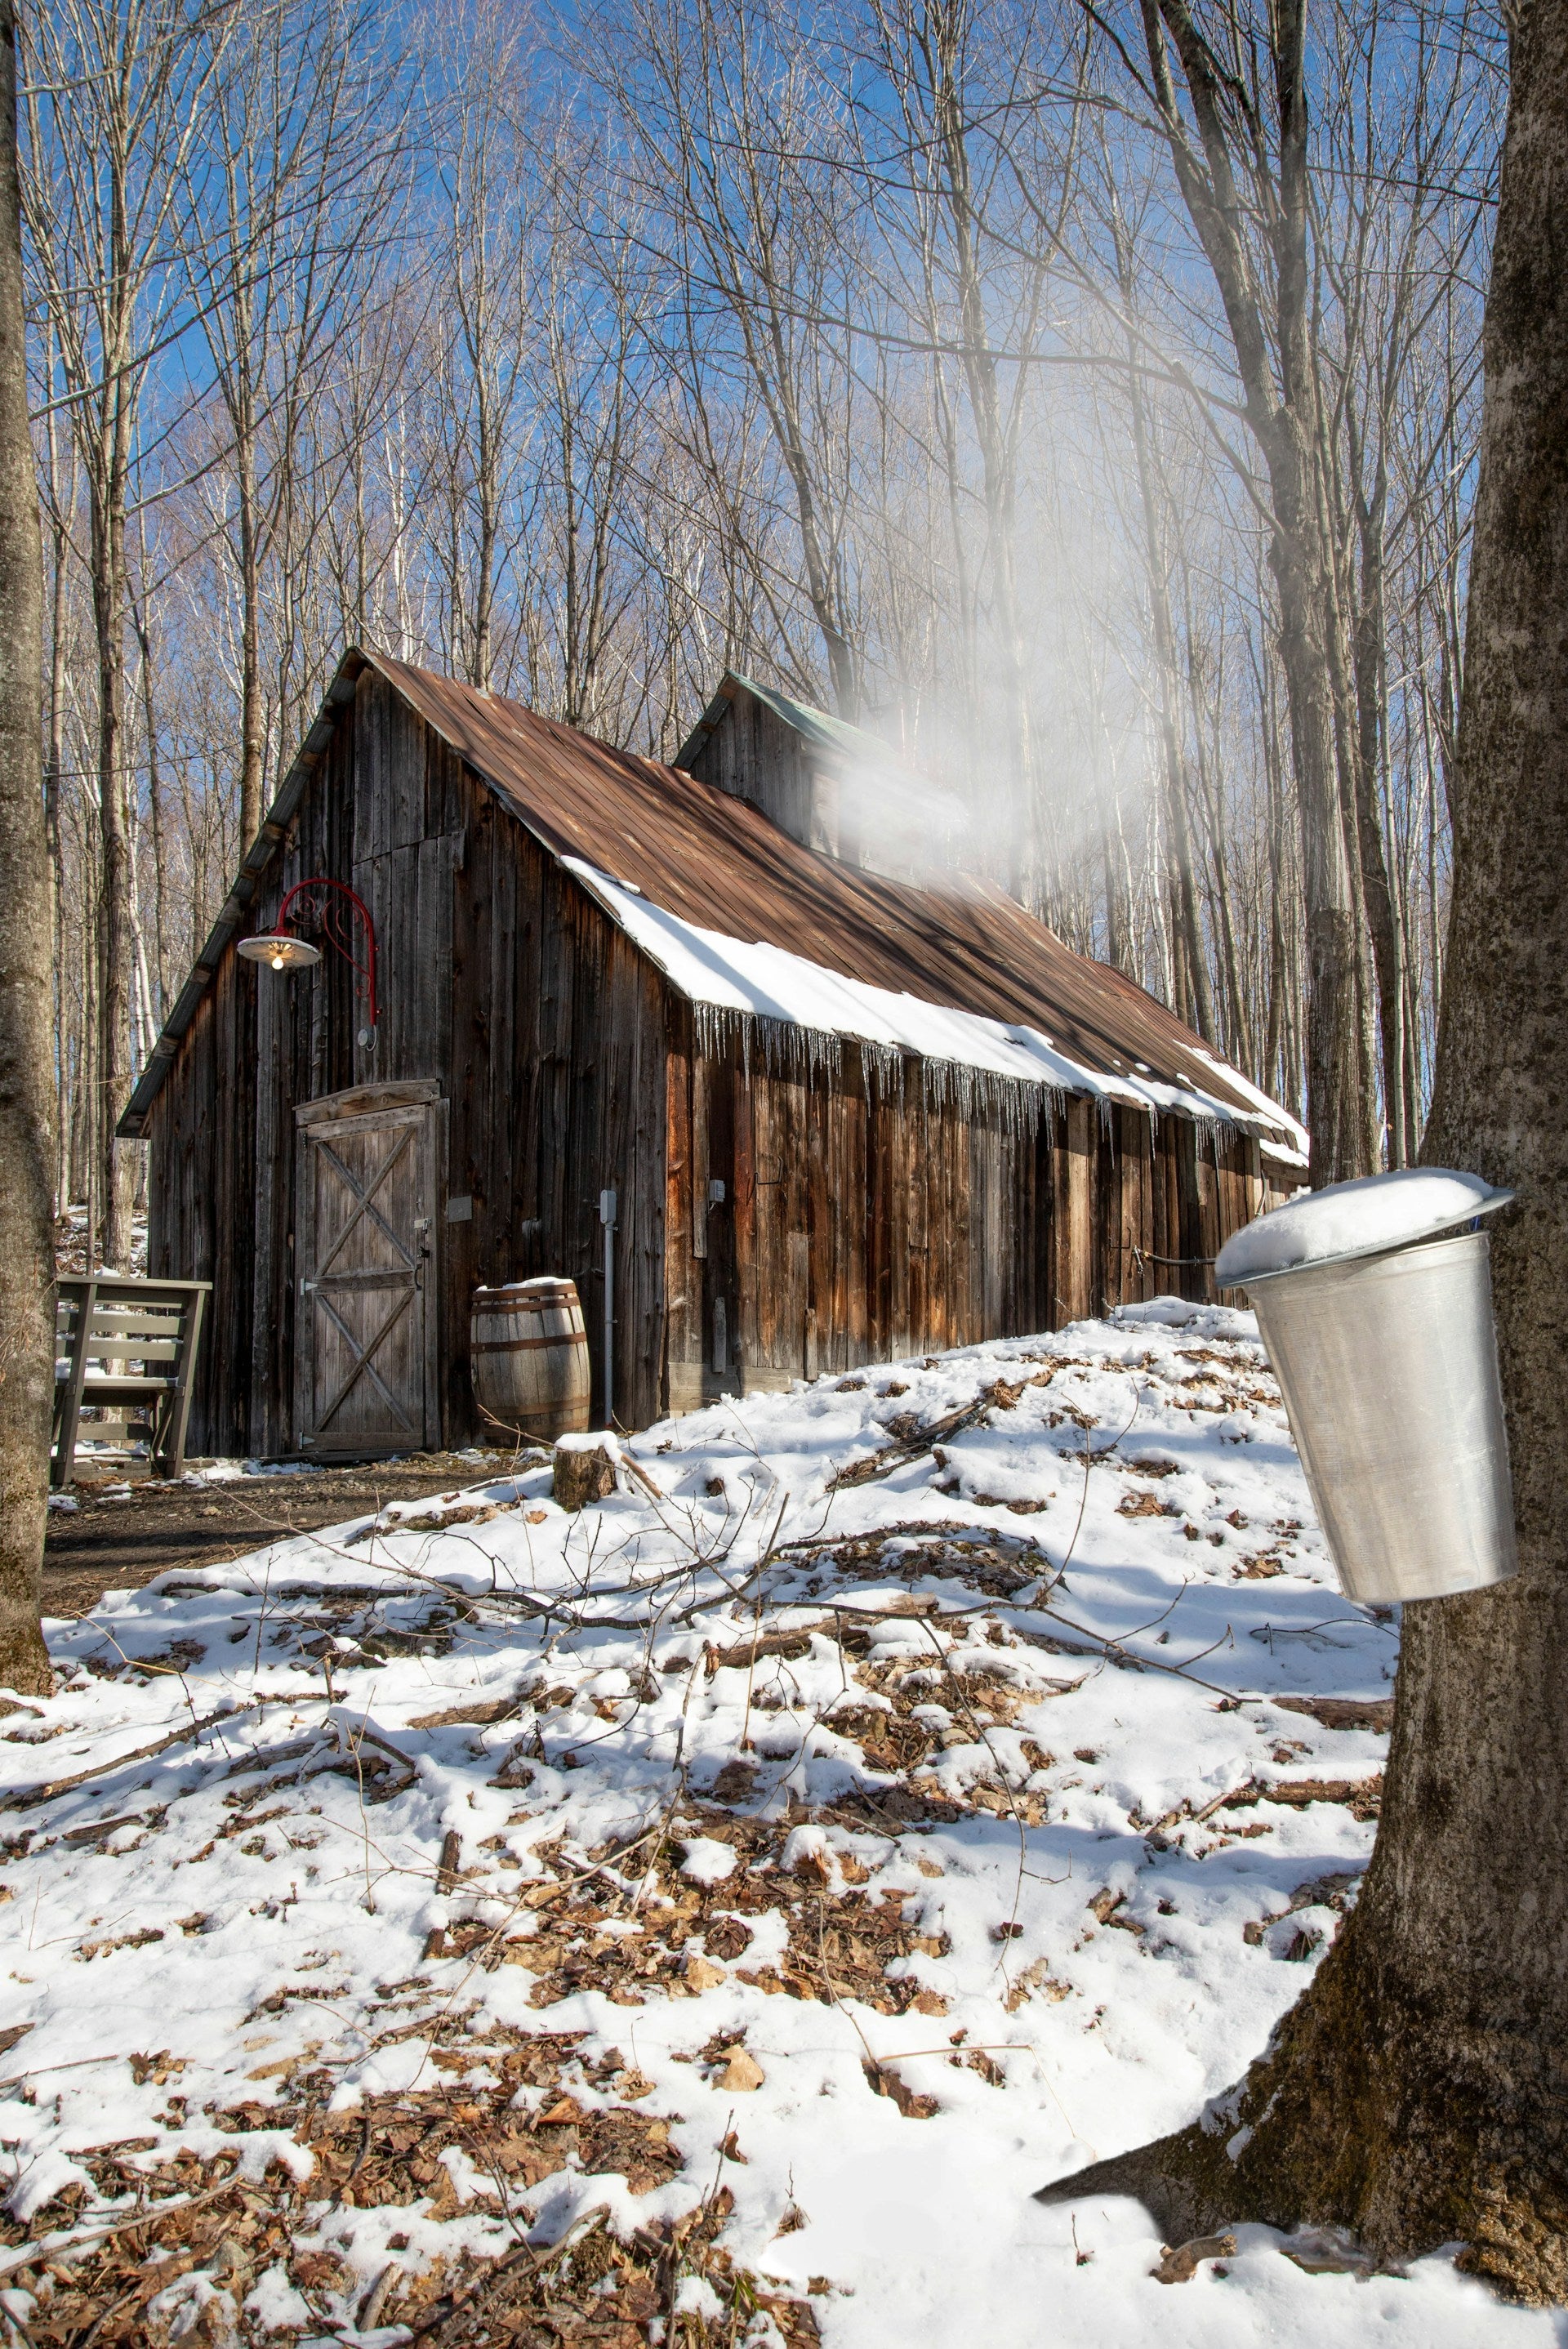 An old maple sugaring shack during early spring with a traditional sap bucket hanging from a maple tree